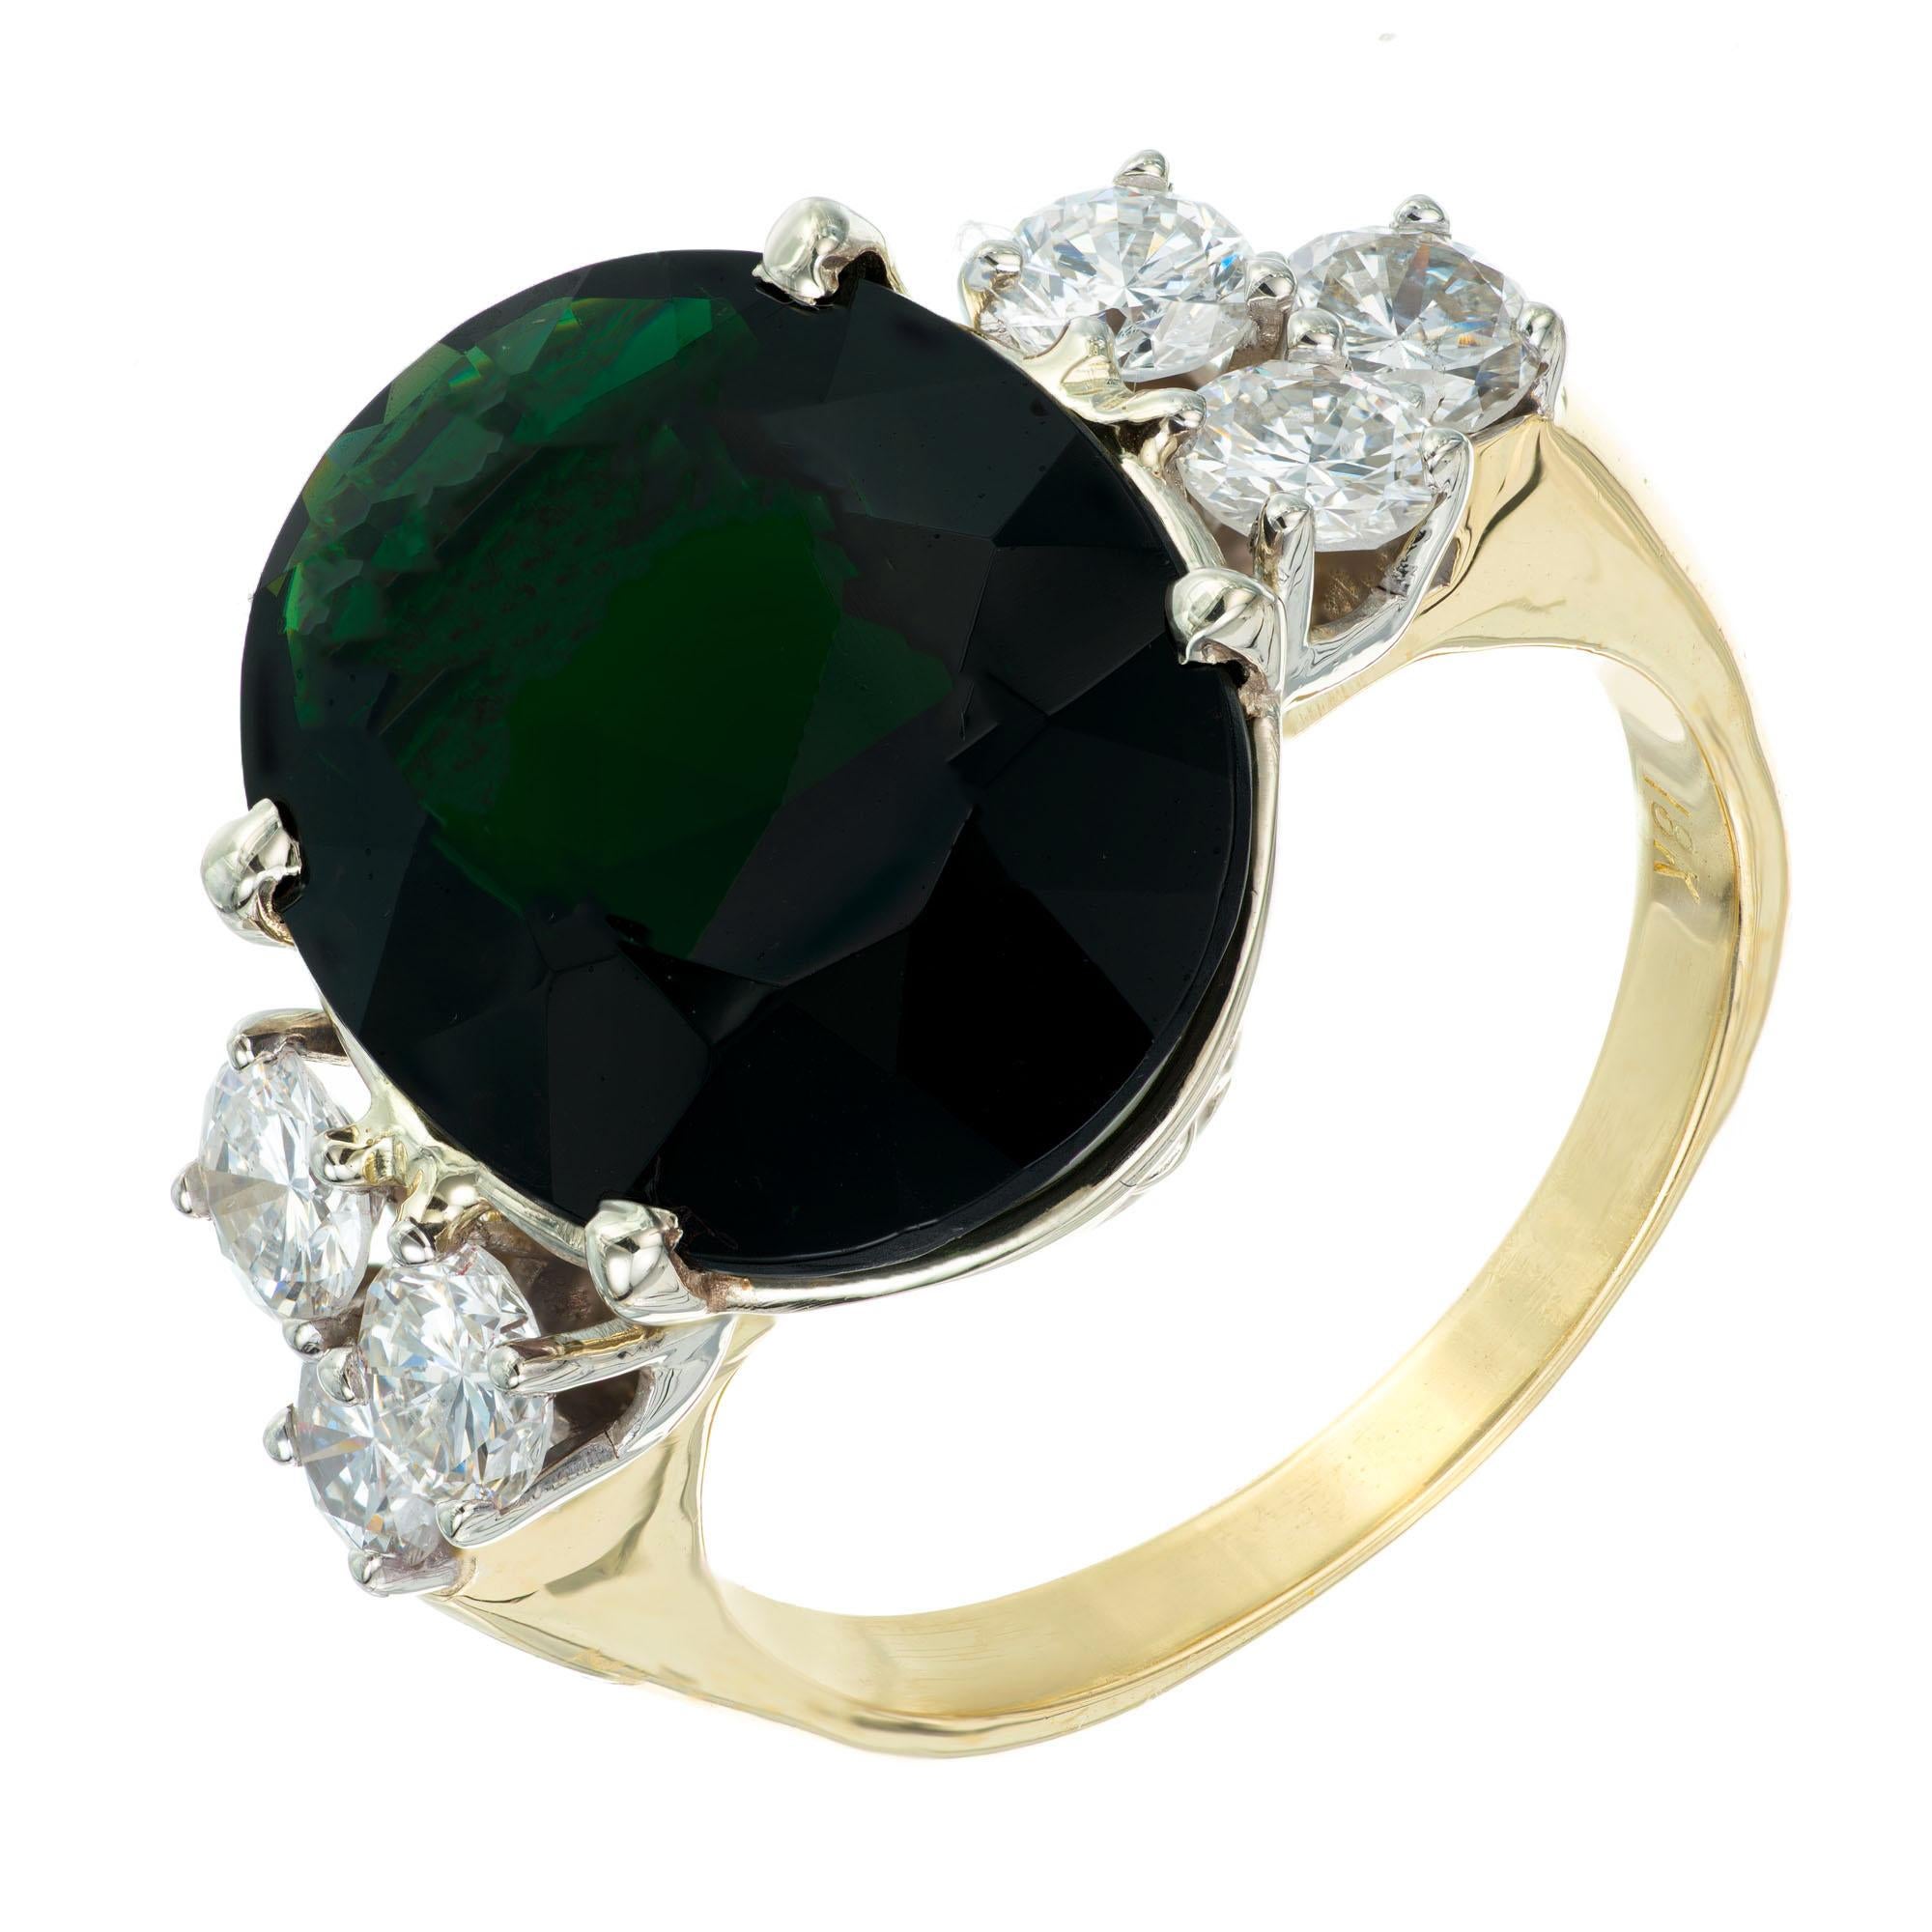 Deep large oval green Tourmaline and diamond cocktail ring. Handmade 18k yellow and white gold setting with 3 bright brilliant cut diamonds on each side.  

1 Natural green 16.7 x 13.2 x 699mm Tourmaline, approx. 8.50 cts
6 brilliant cut diamonds